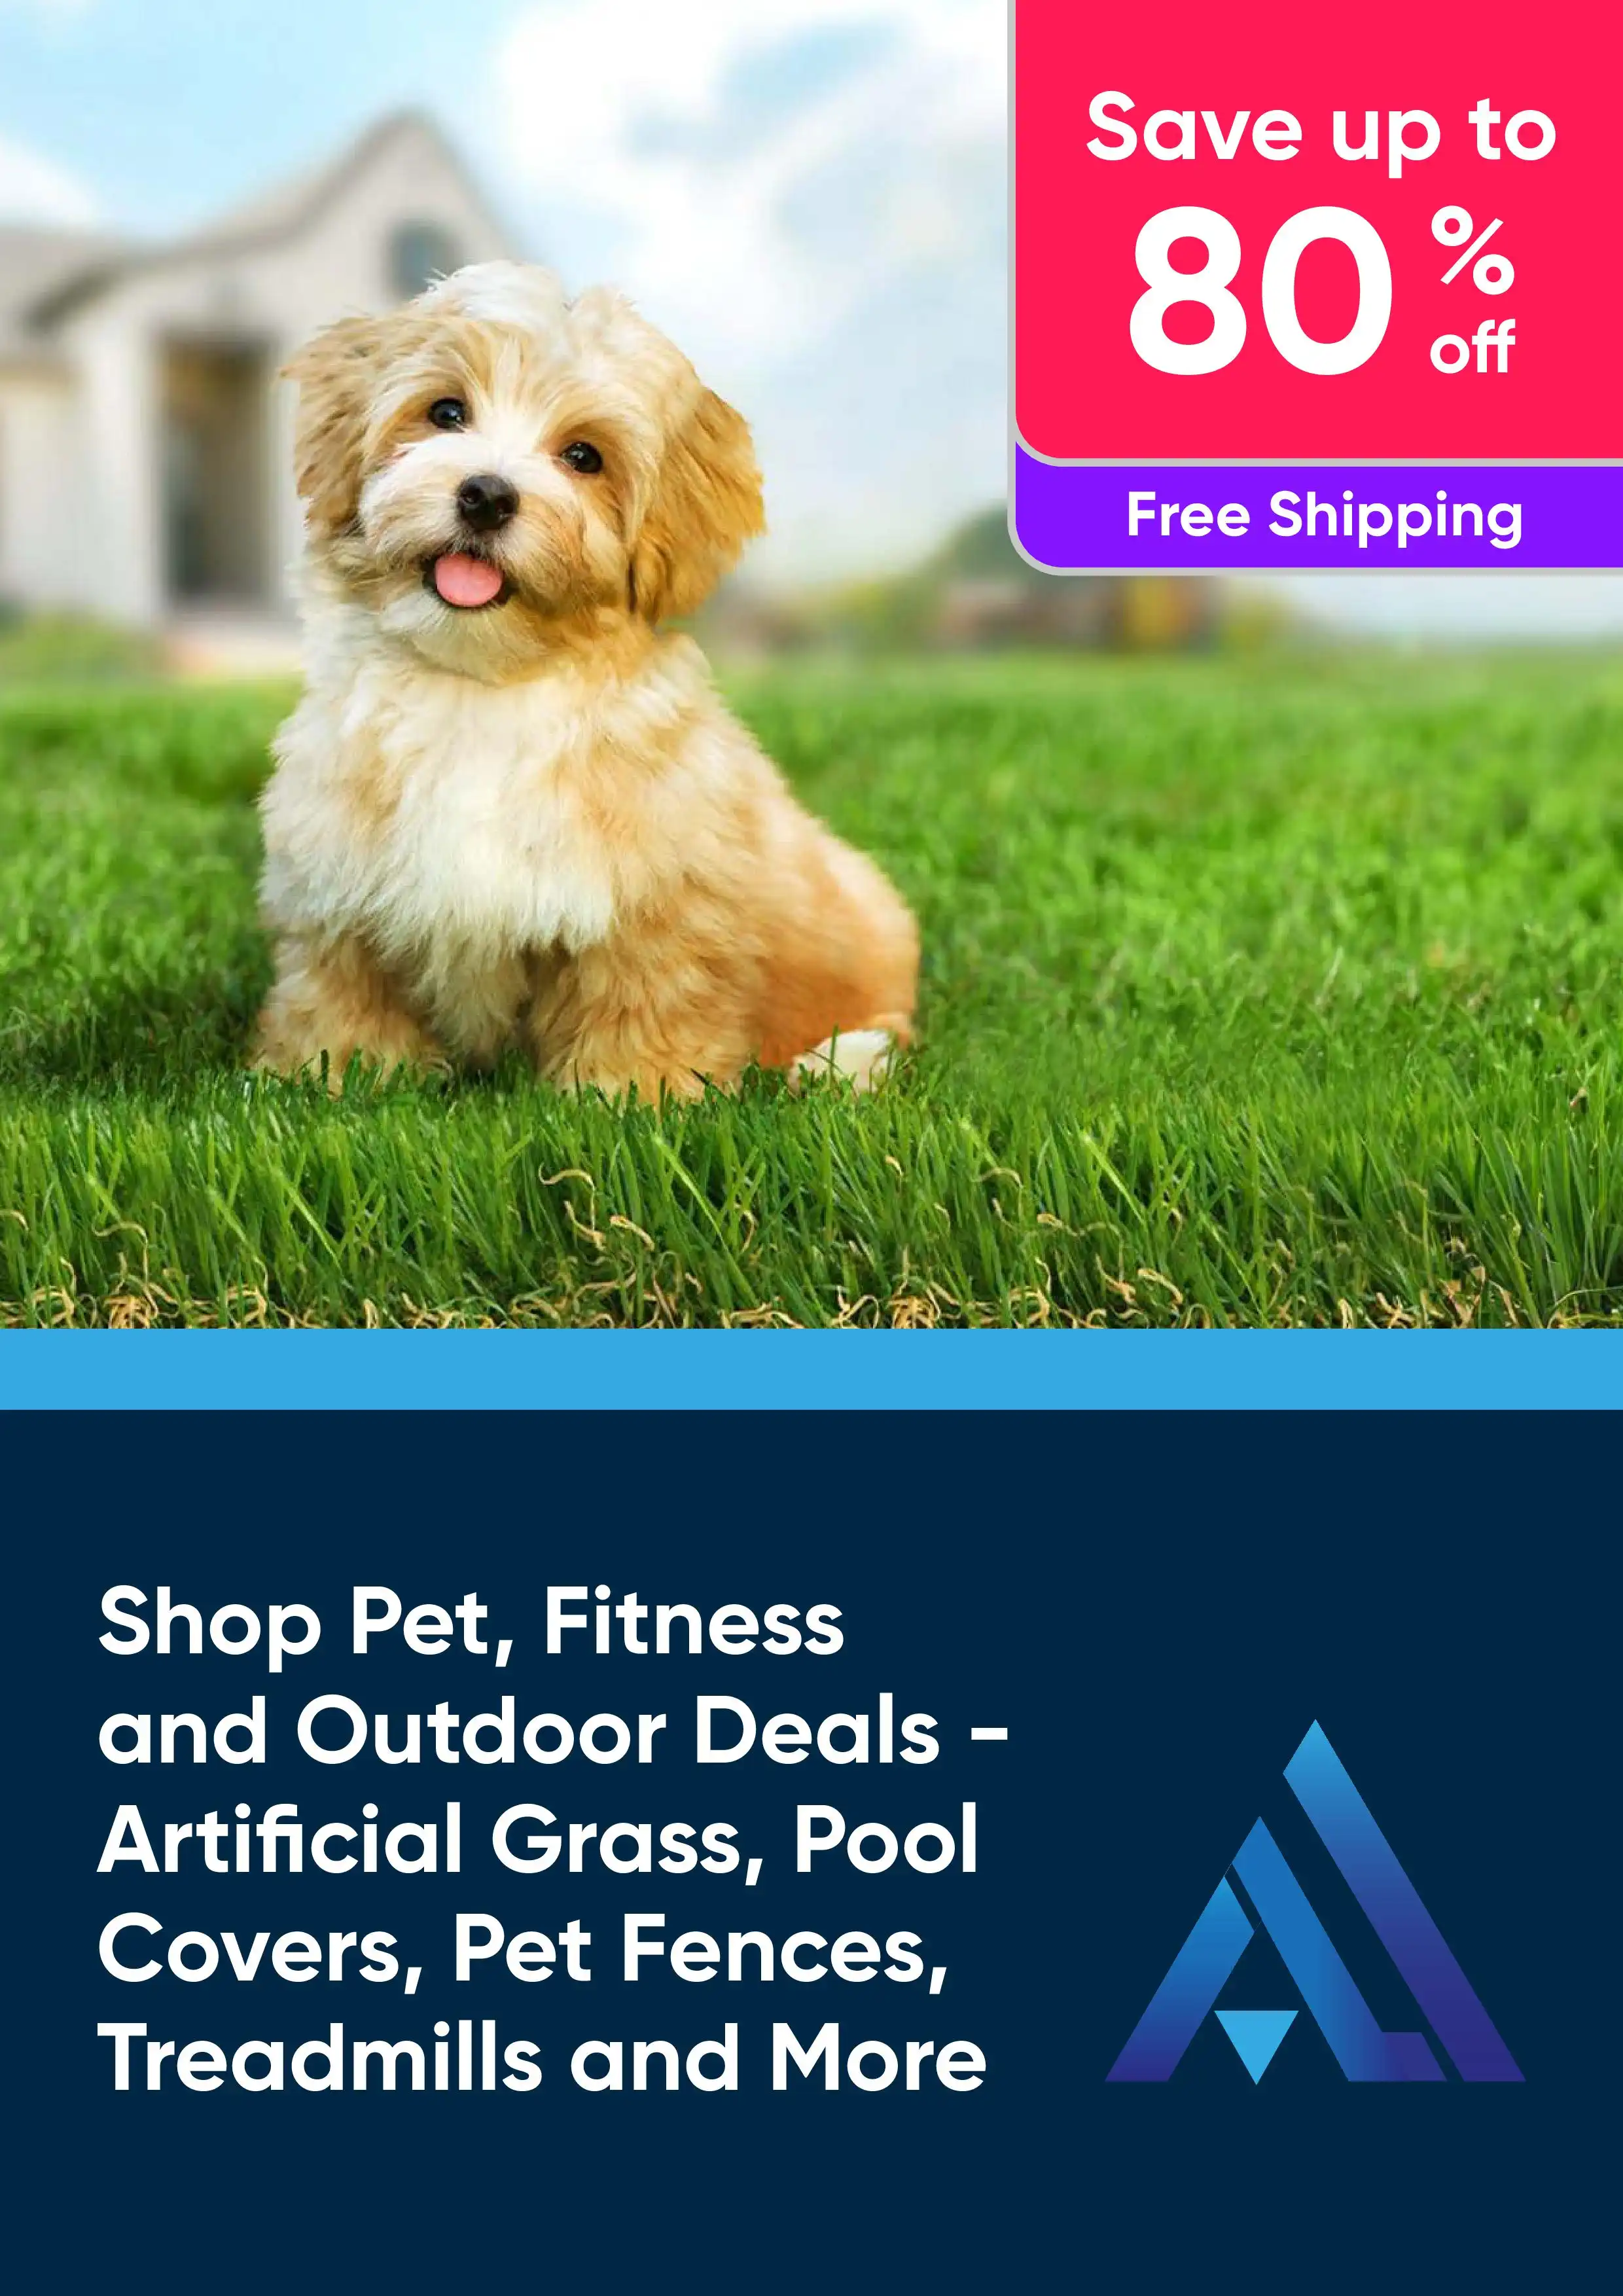 Shop Pet, Fitness and Outdoor Deals - Save Up to 80% Off Artificial Grass, Pool Covers and More